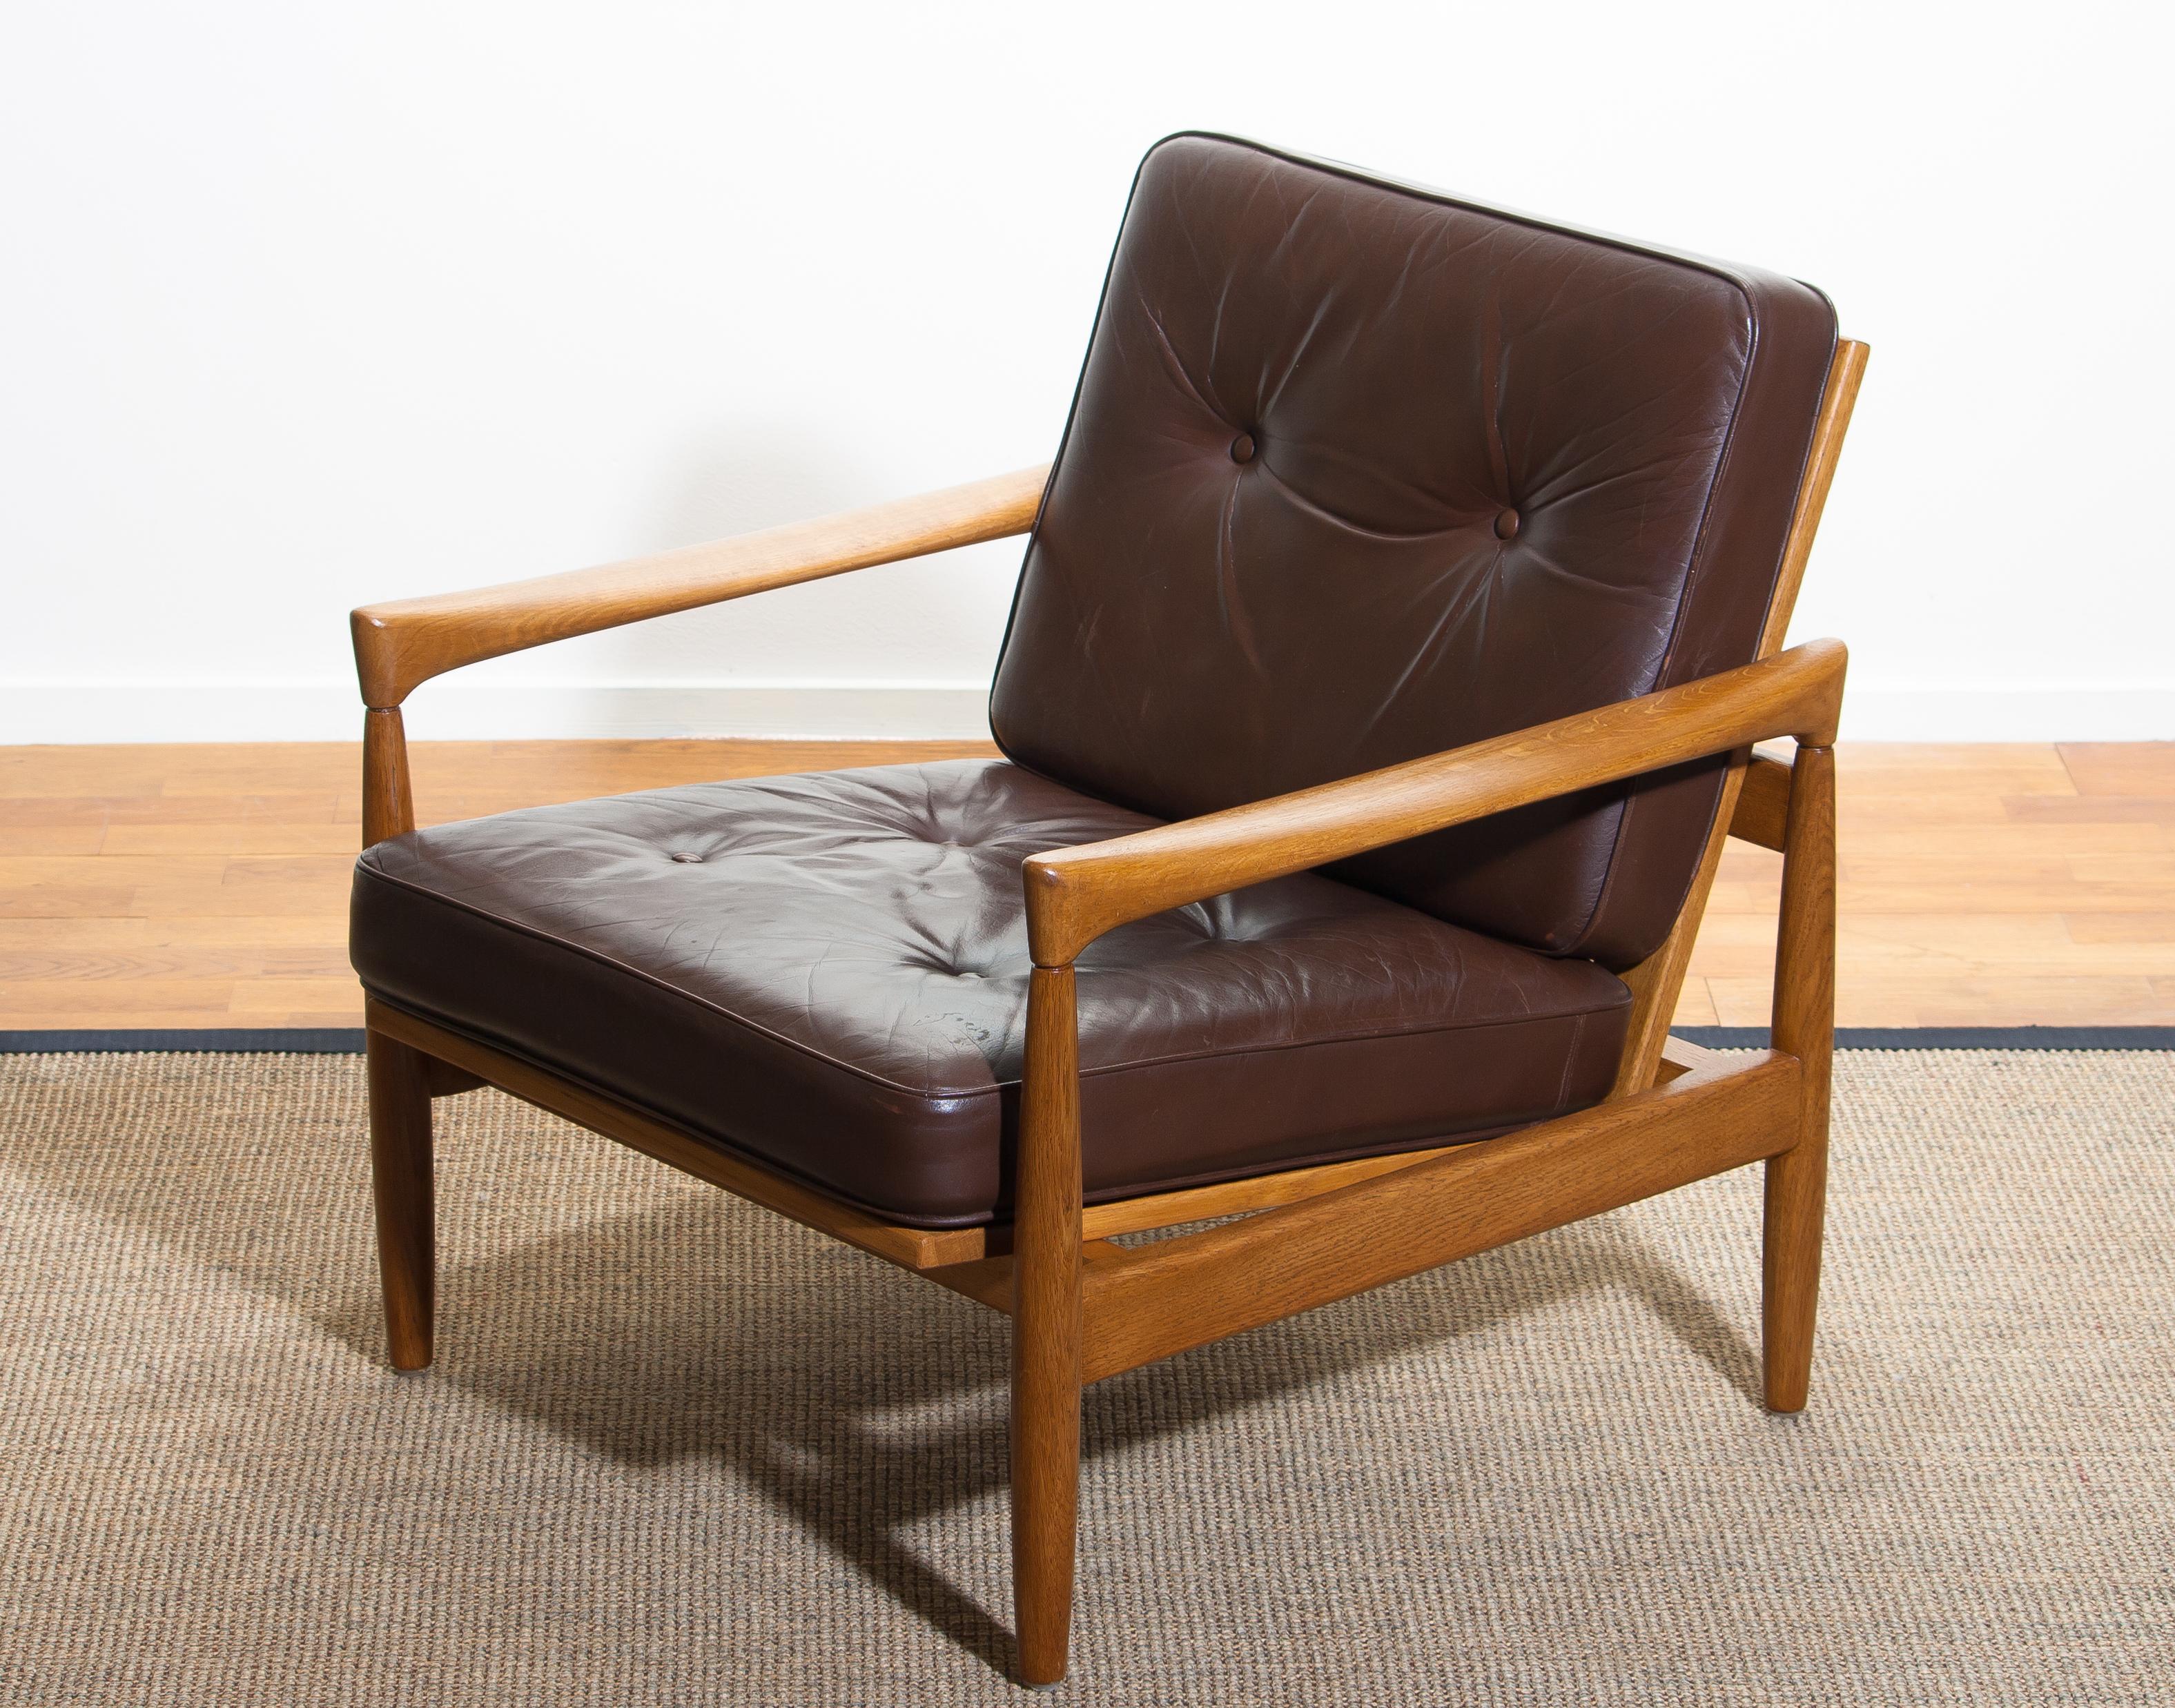 1960s, Oak and Brown Leather Lounge Chair by Erik Wörtz for Bröderna Anderssons 7